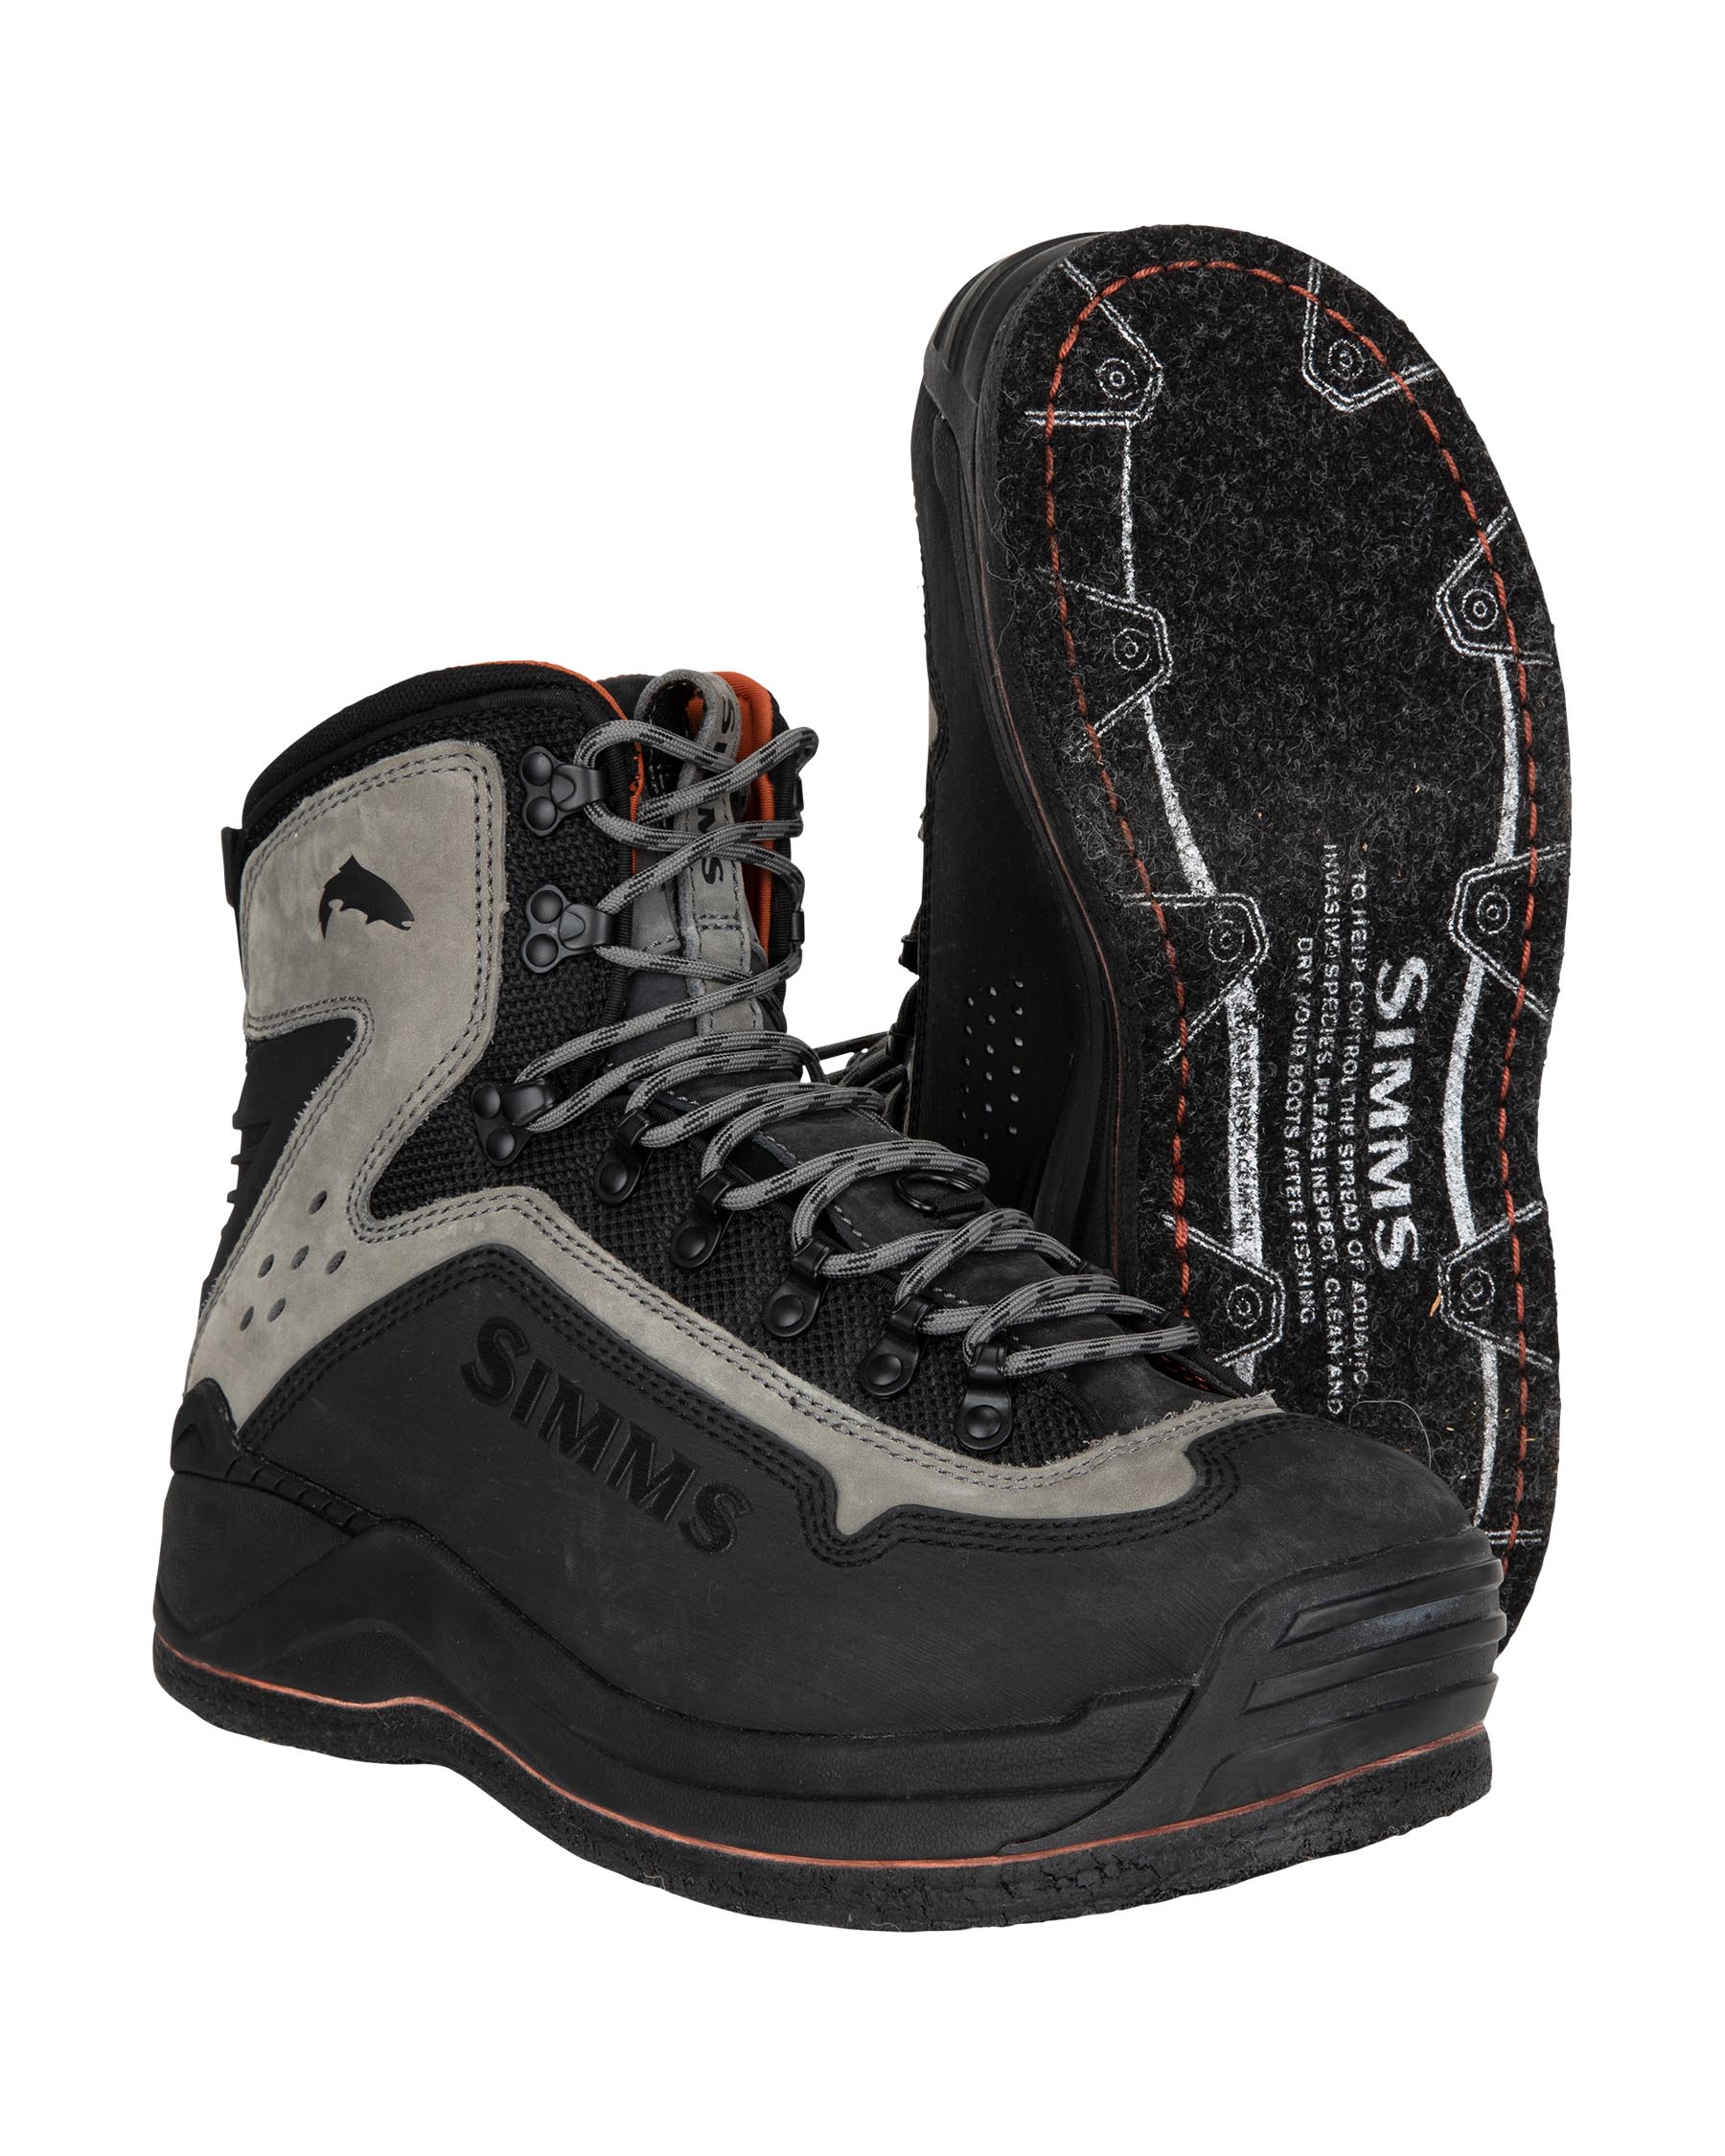 M's G3 Guide Wading Boots - Felt Sole